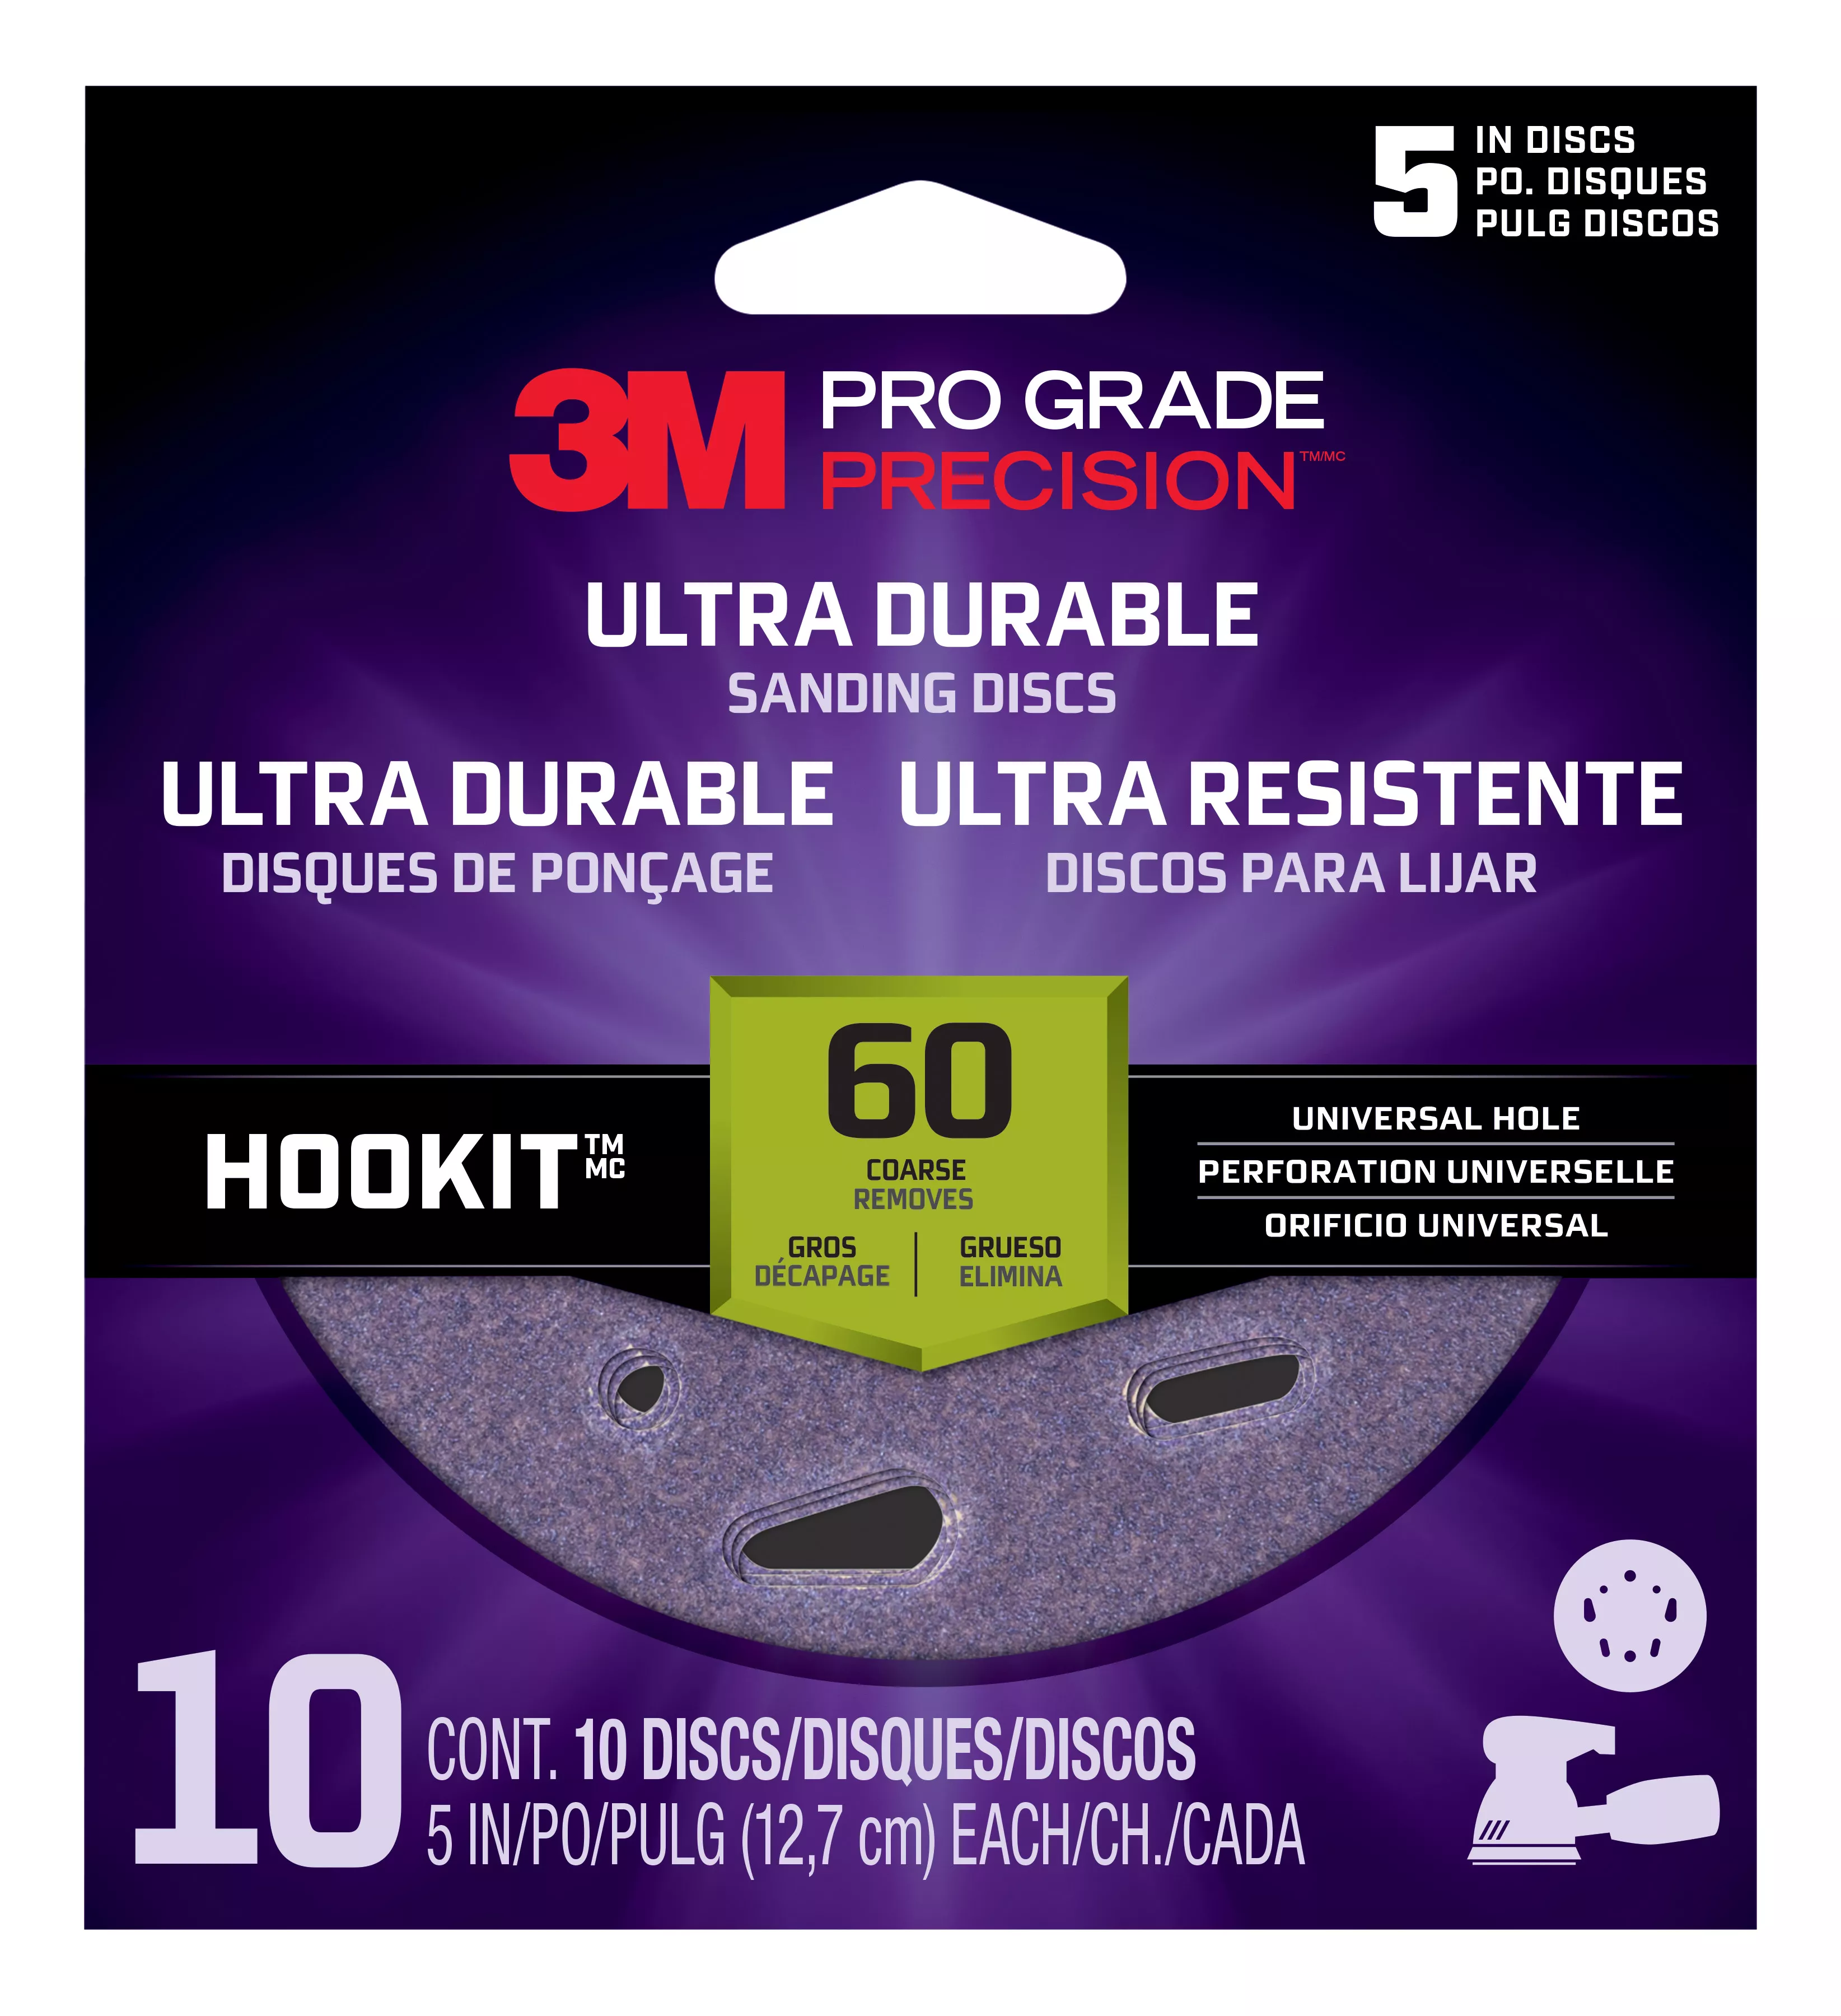 3M™ Pro Grade Precision™ Ultra Durable Universal Hole Sanding Disc
DUH560TRI-10I, 5 inch UH, 60, 10/pack